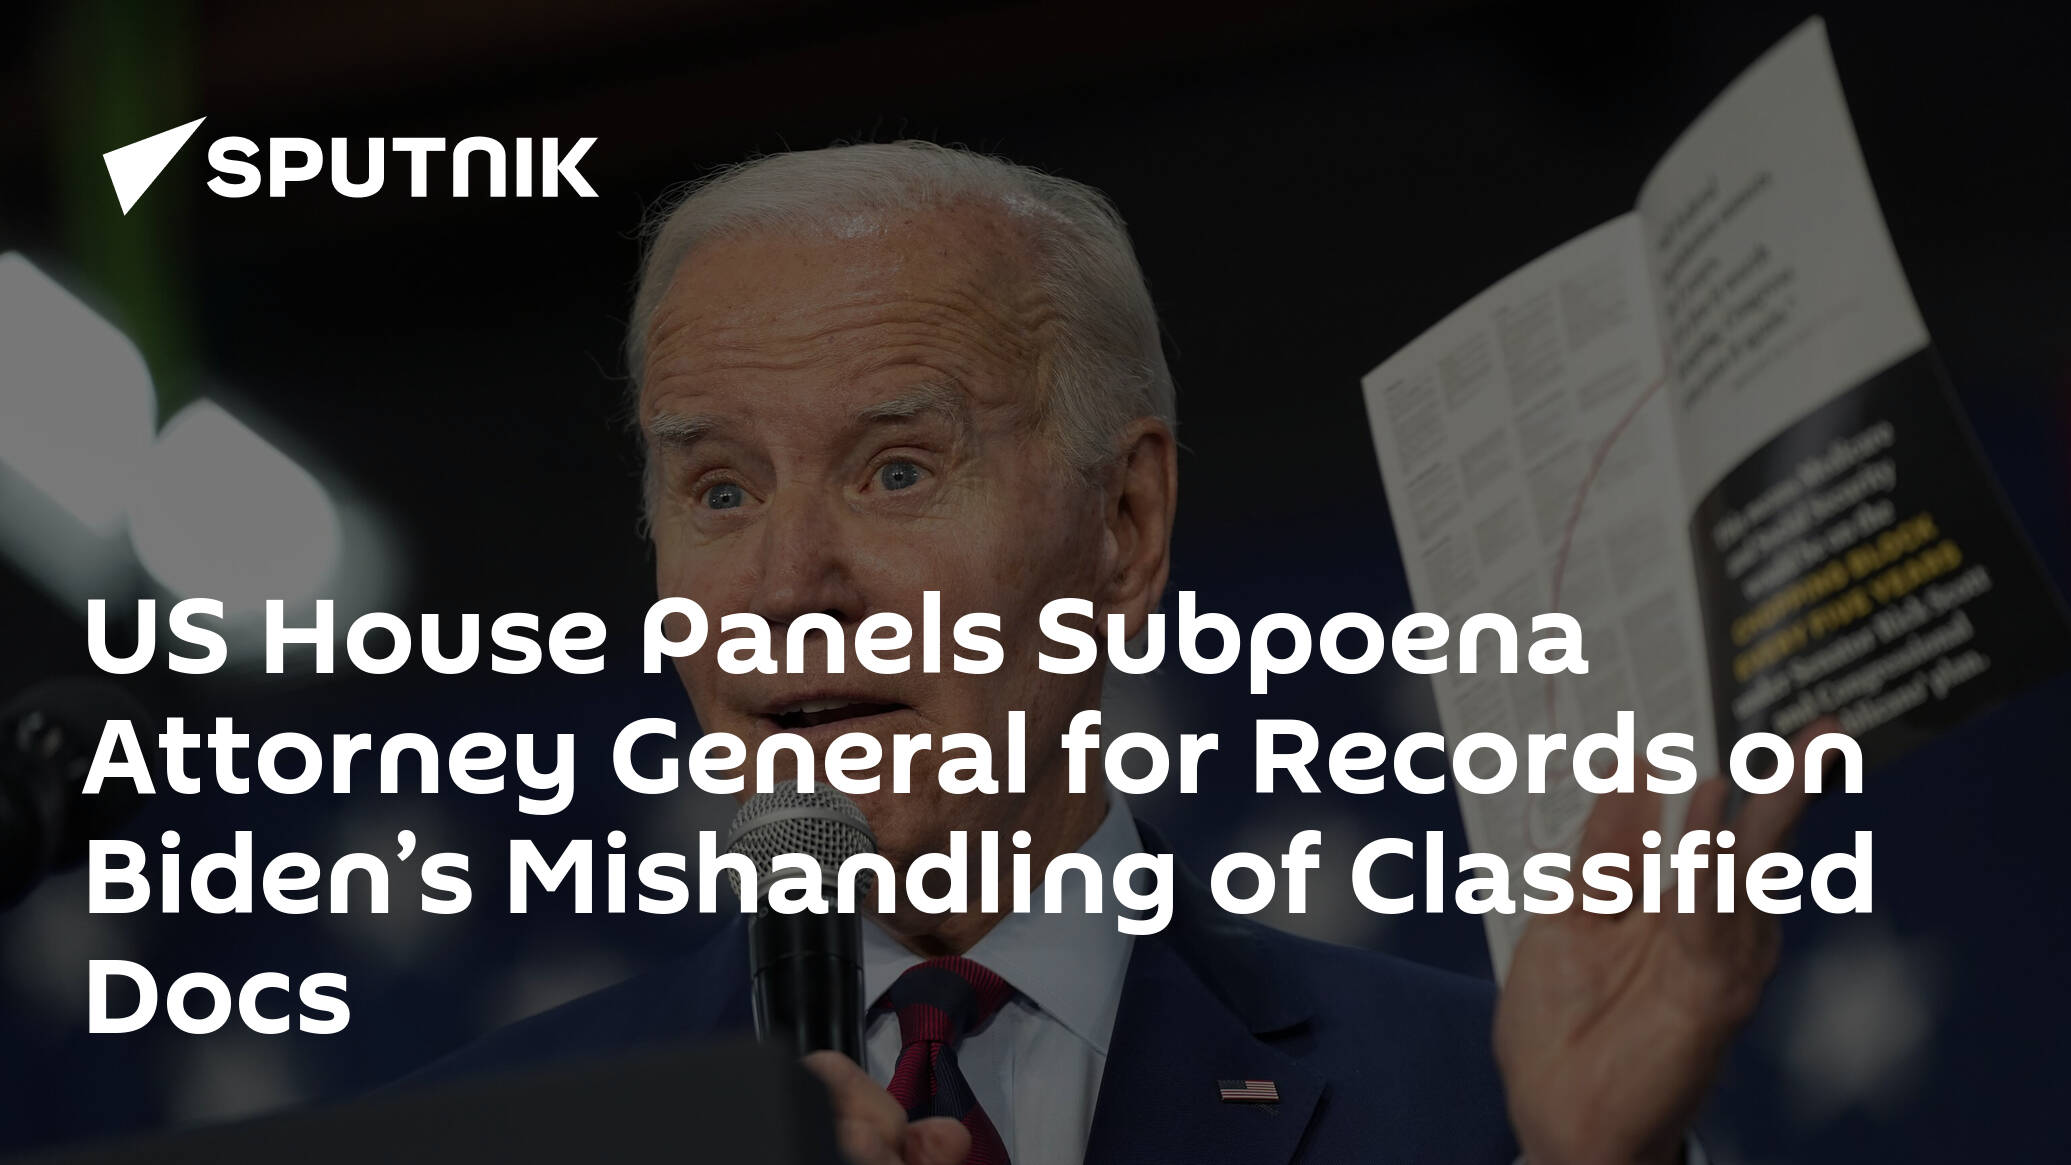 US House Panels Subpoena Attorney General for Records on Biden’s Mishandling of Classified Docs